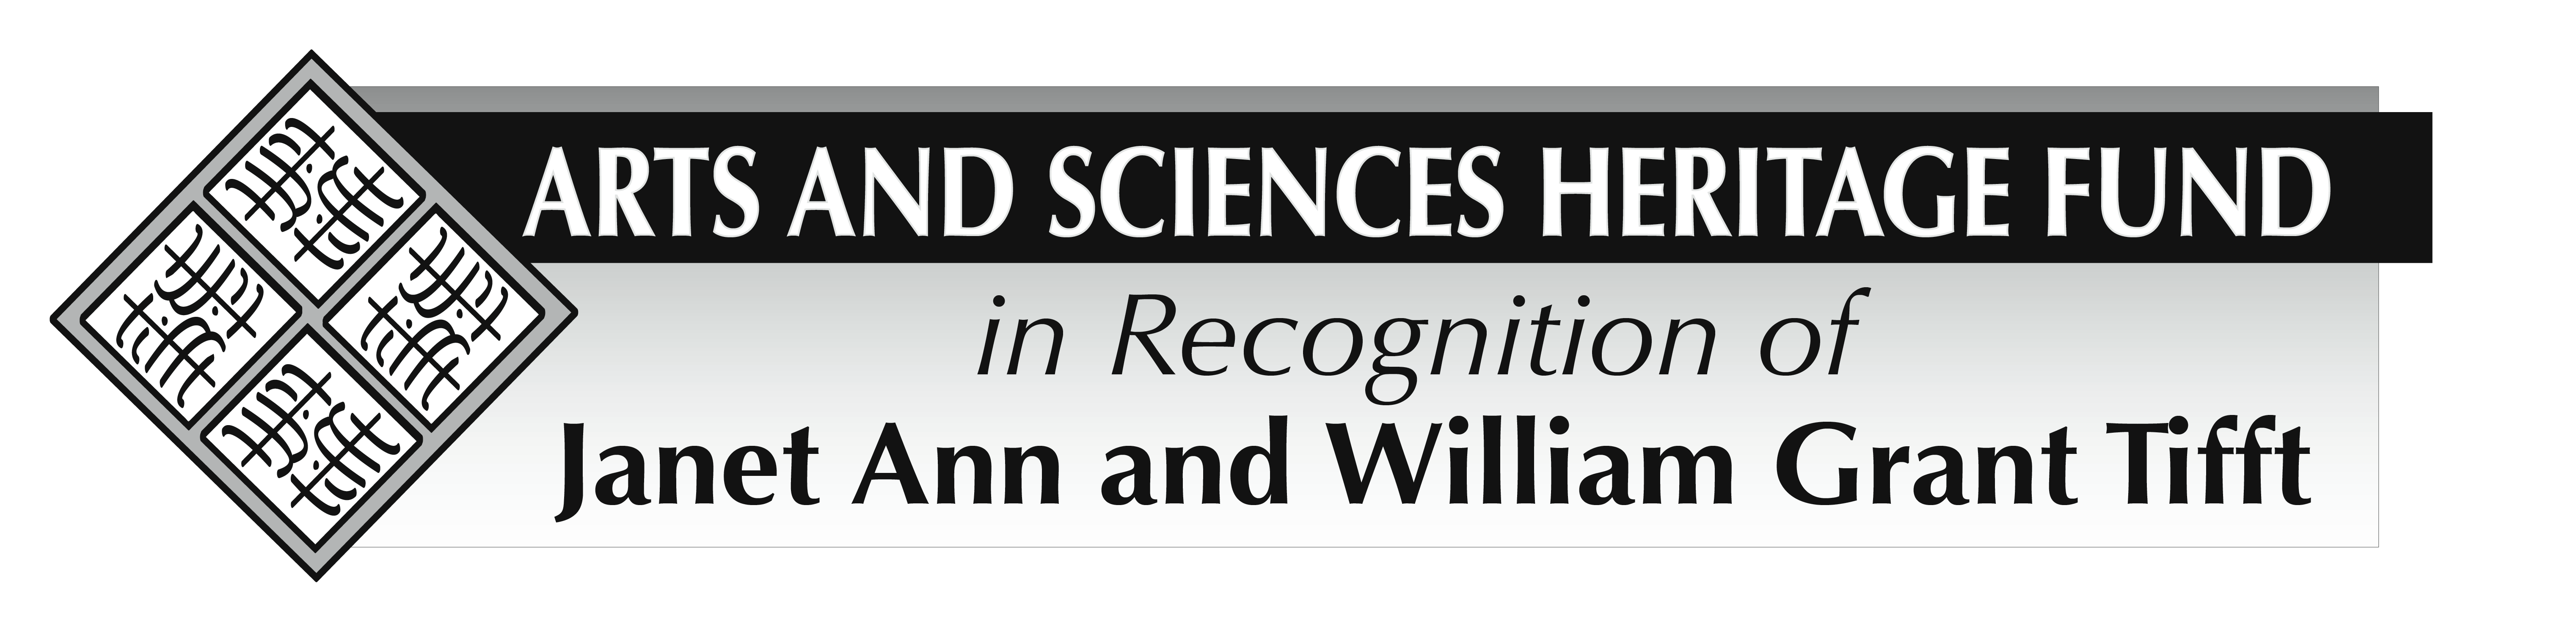 Arts and Sciences Heritage Fund in Recognition of Janet Ann and William Grant Tifft